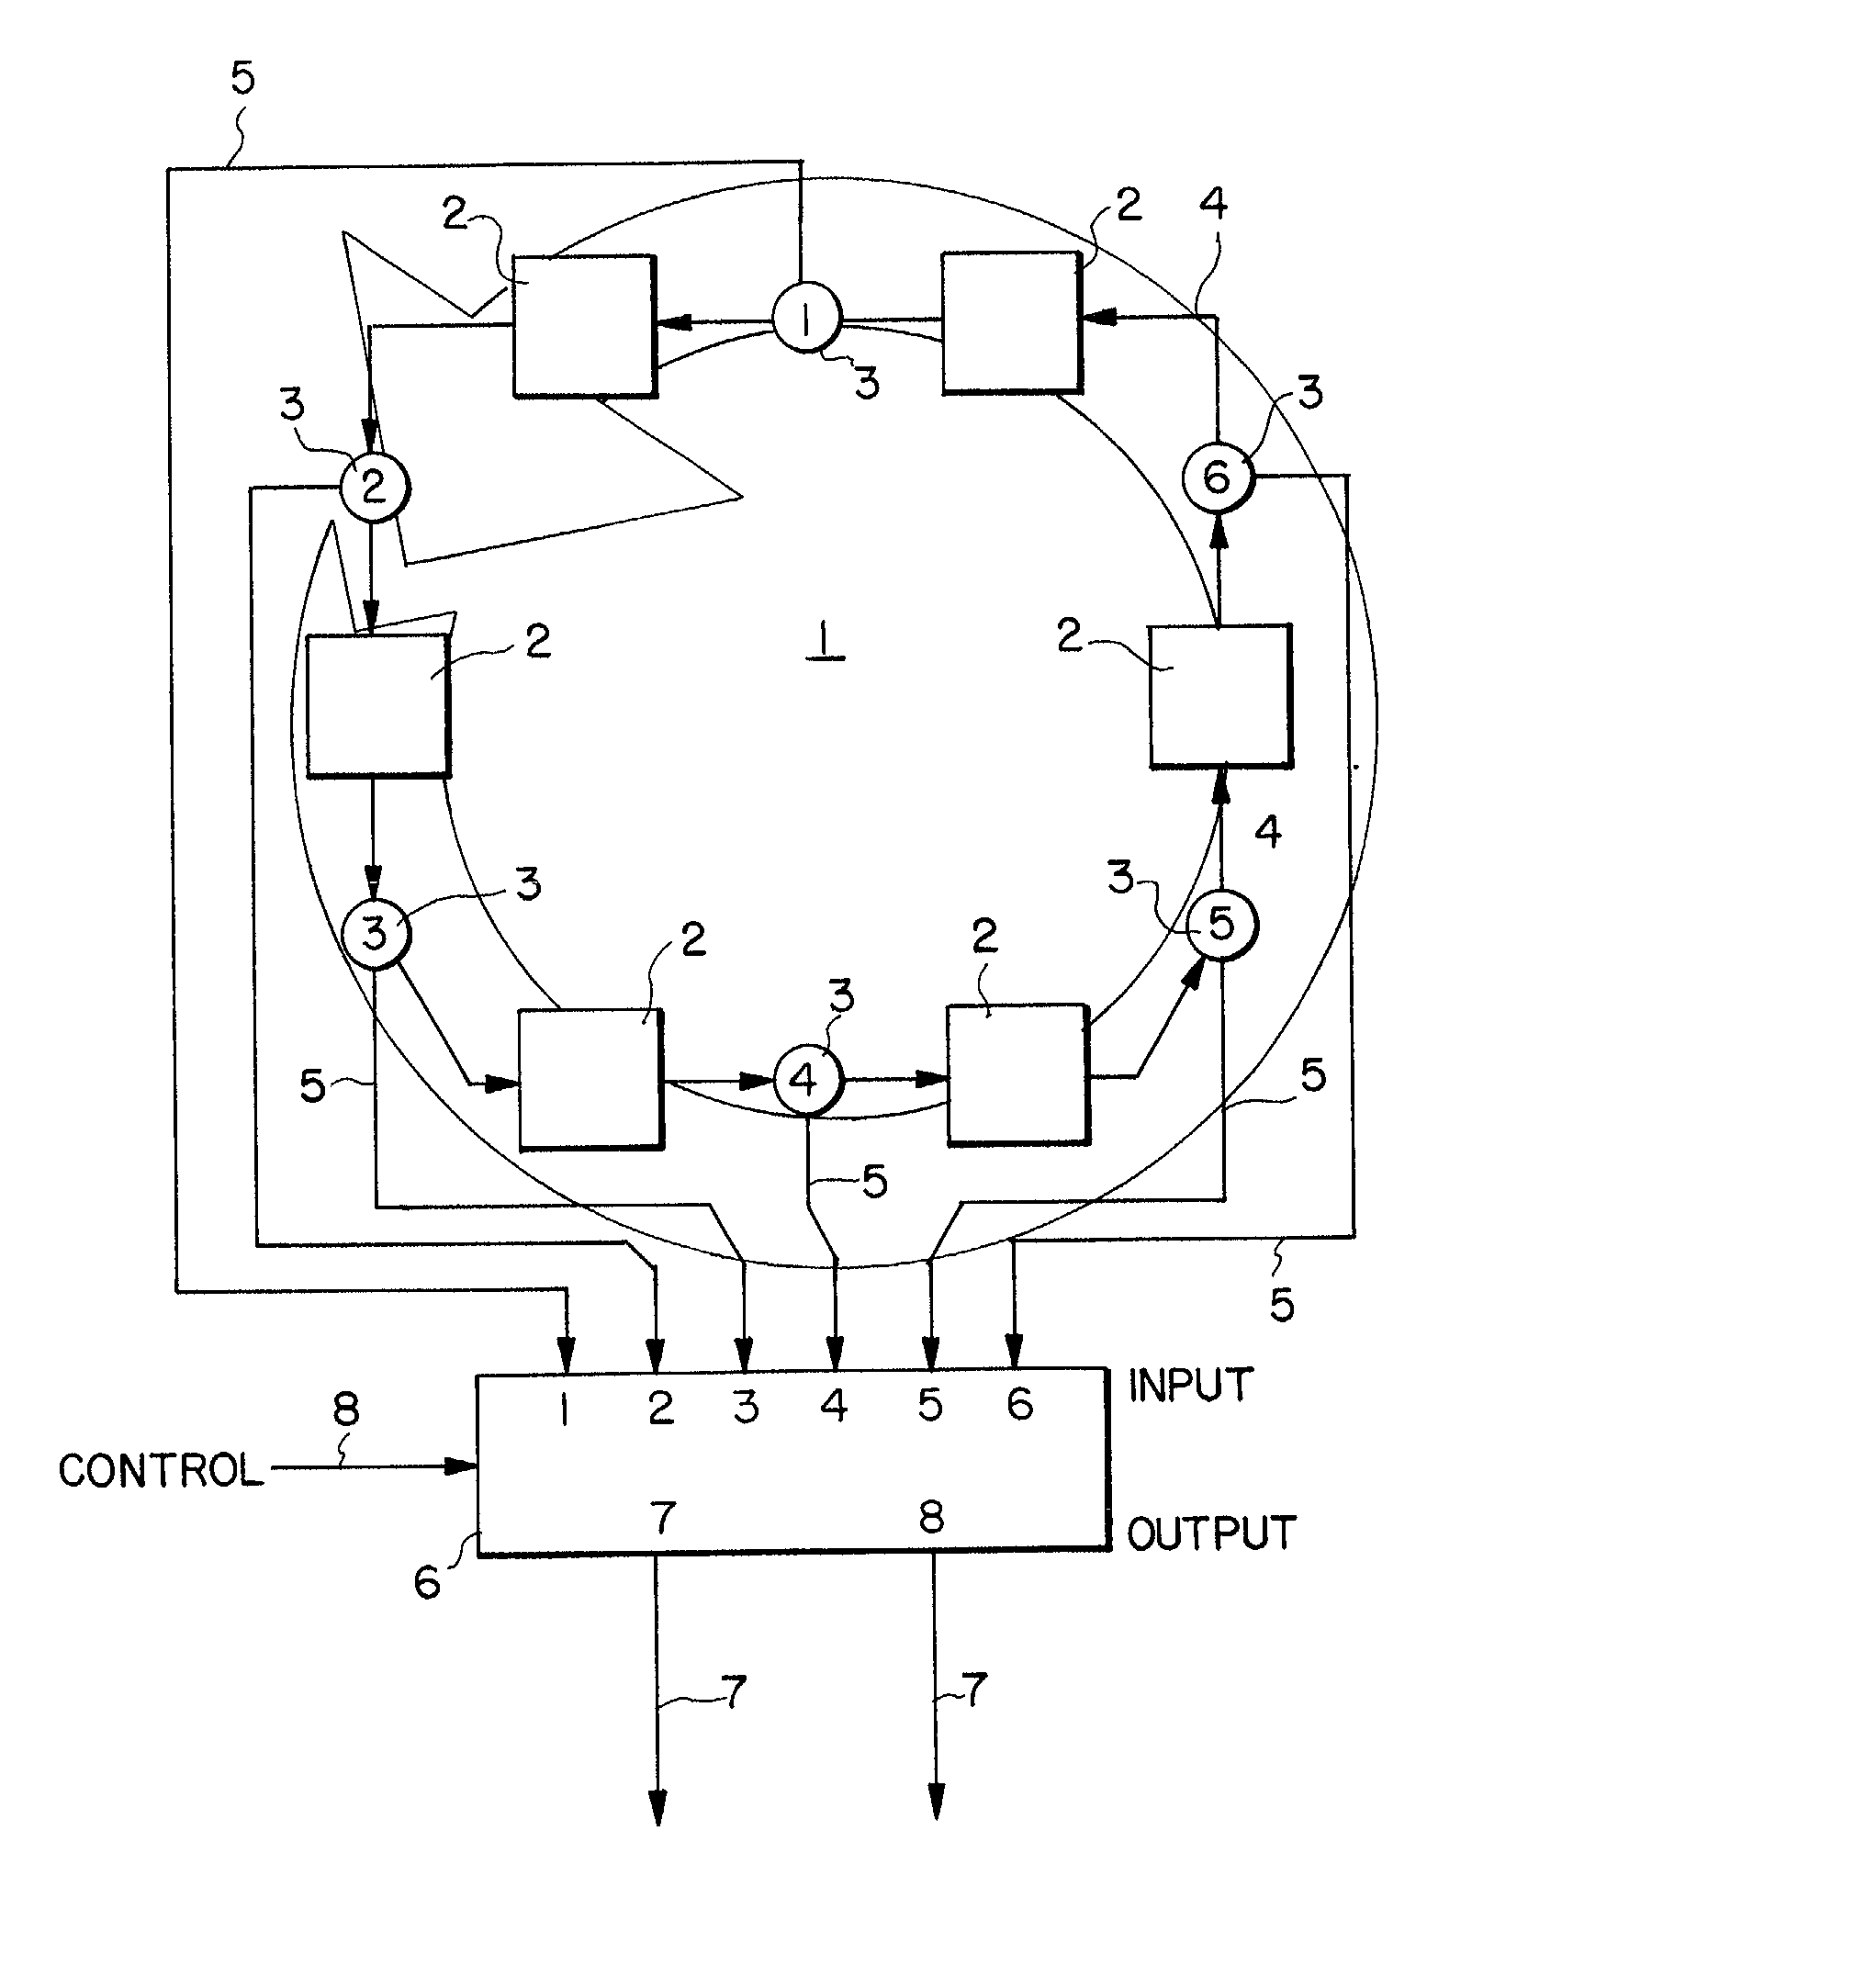 Memory device having a systematic arrangement of logical data locations and having plural data portals